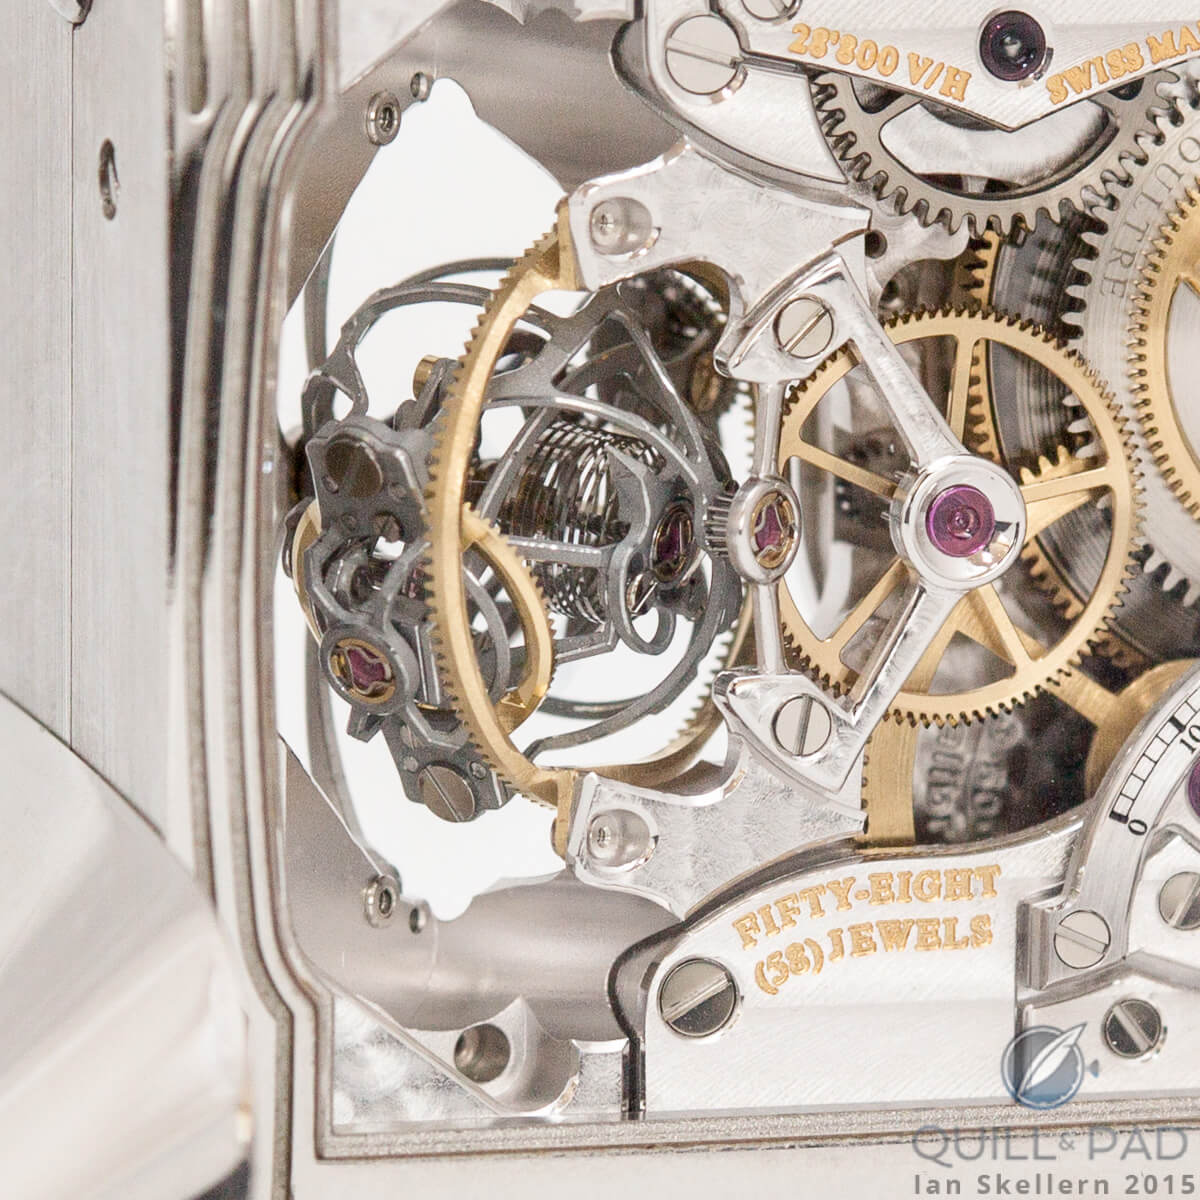 The incredibly complex multi-axis regulator of the Jaeger-LeCoultre Reverso Gyrotourbillon 2